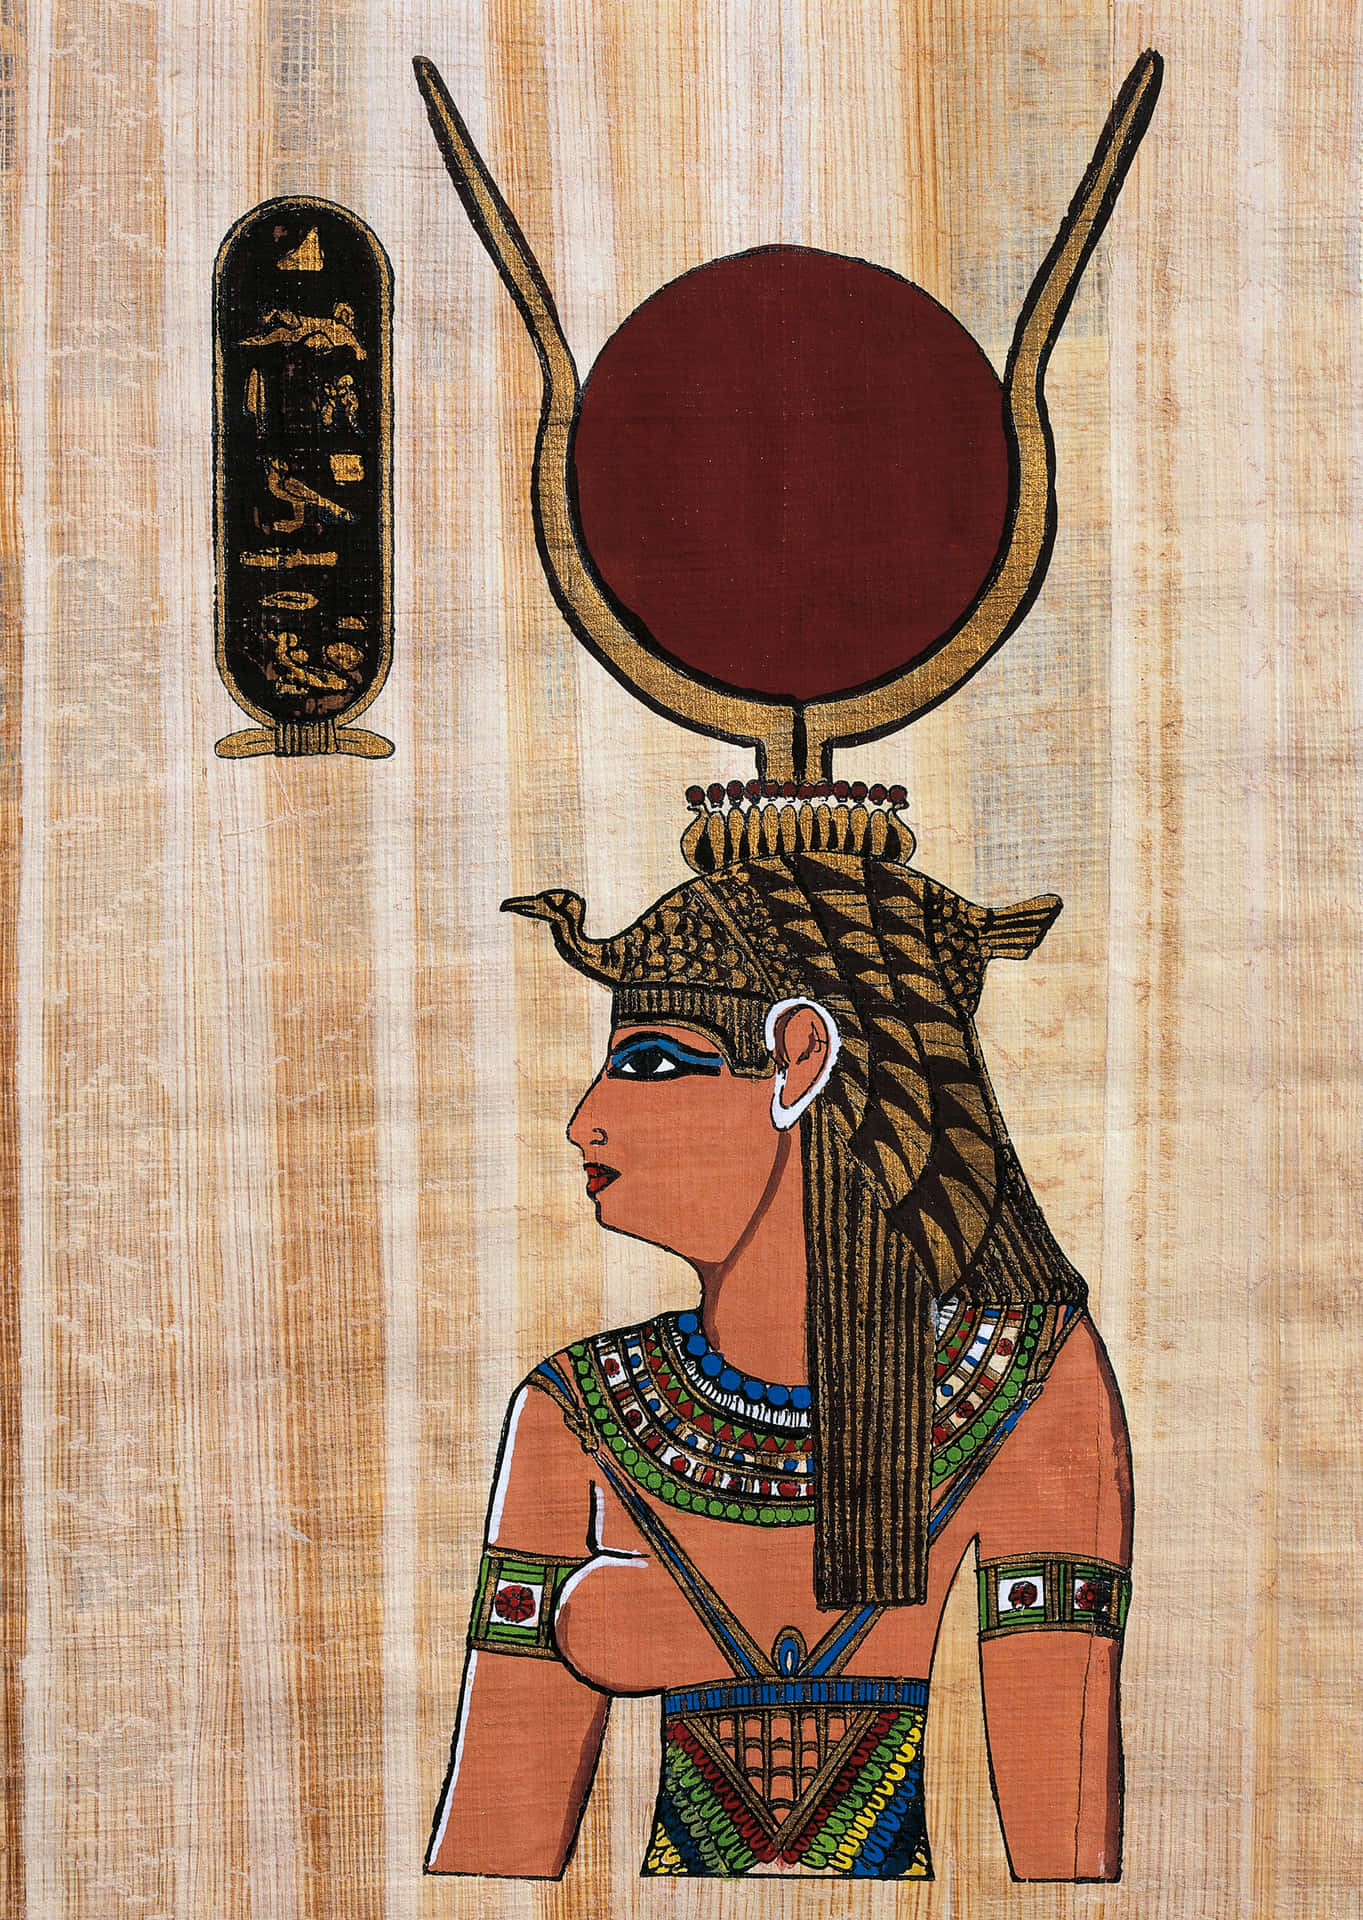 A portrait of the Egyptian queen, Cleopatra